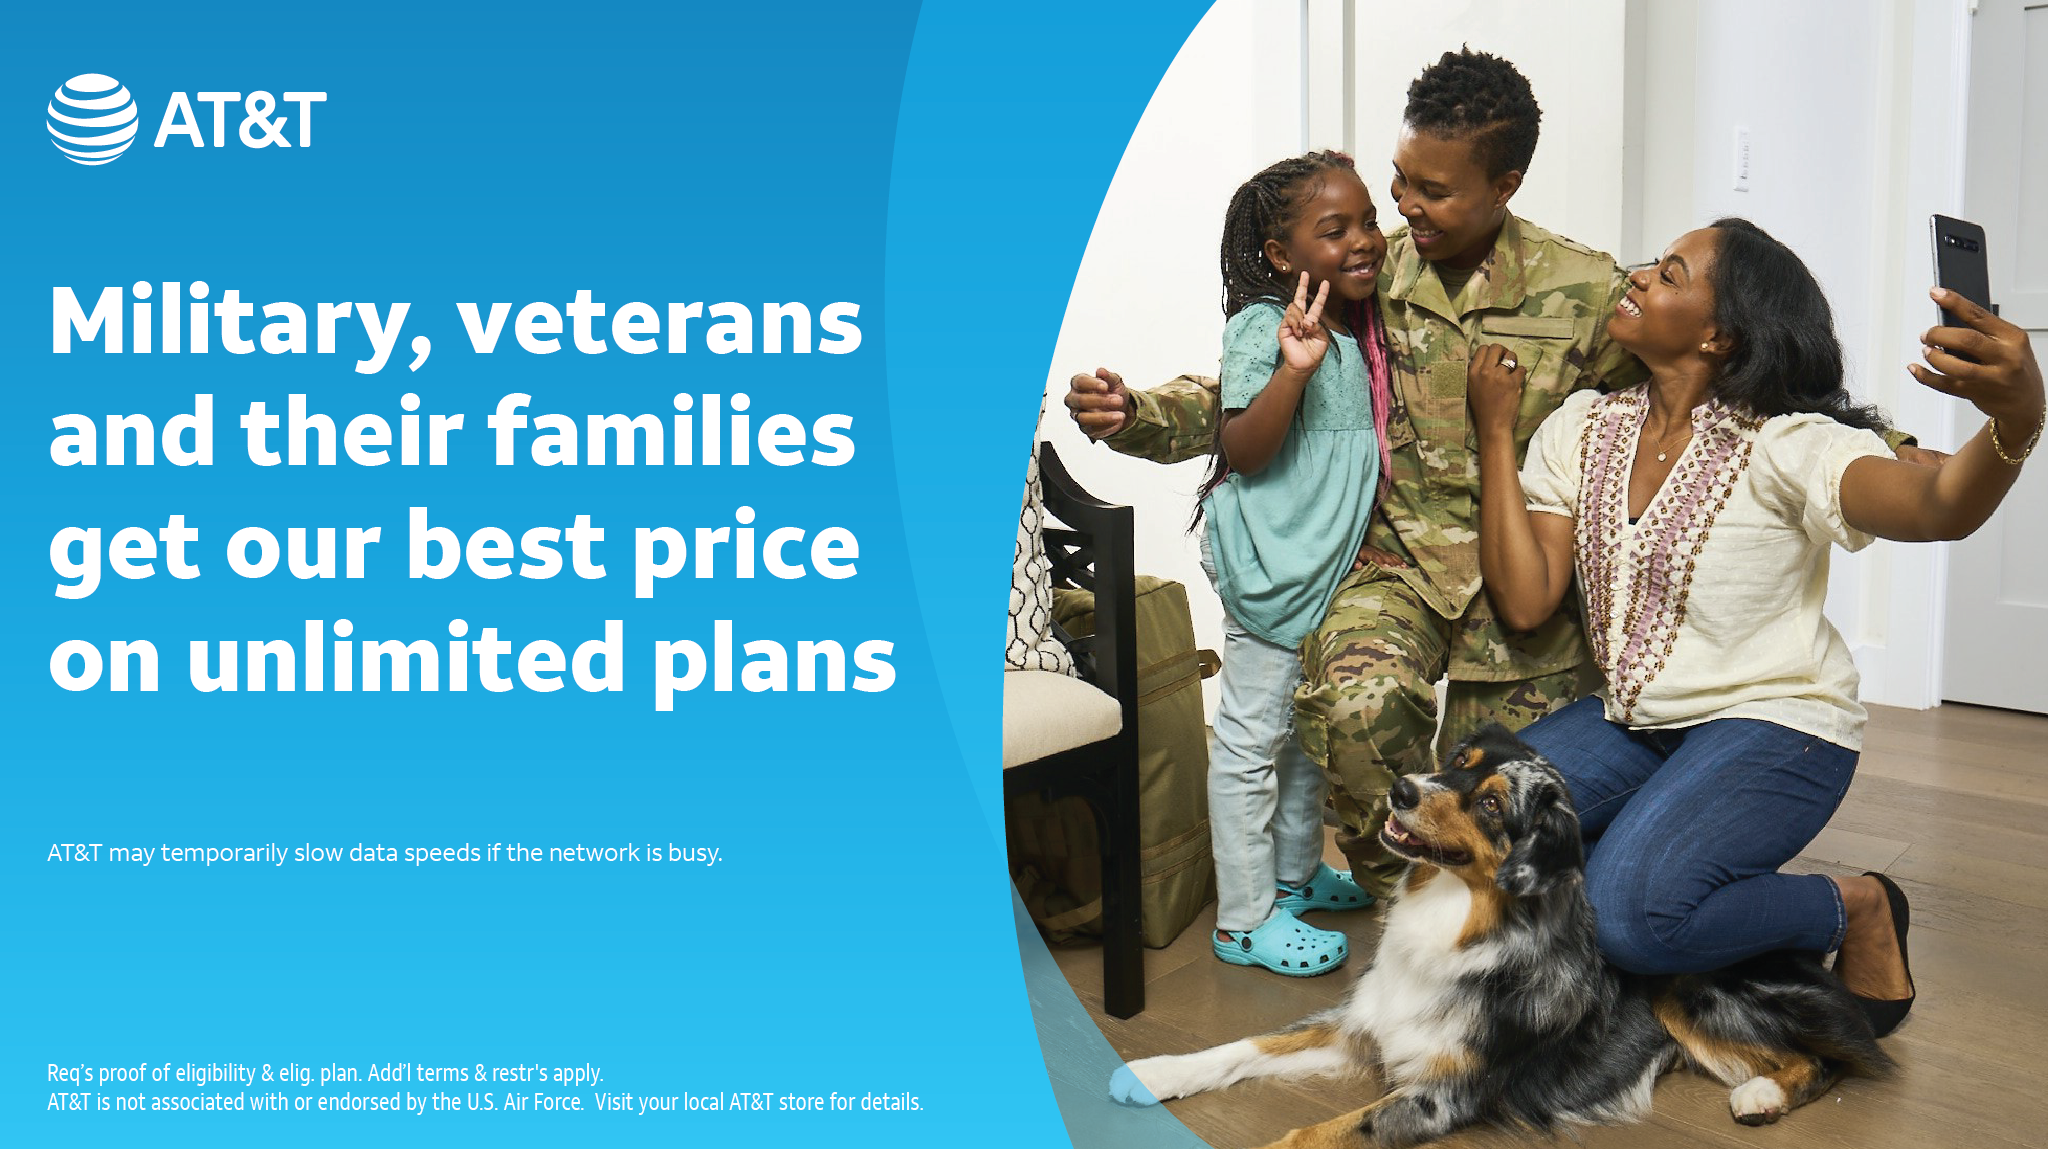 Best Price on unlimited plans for Military, Veterans and their families from AT&T